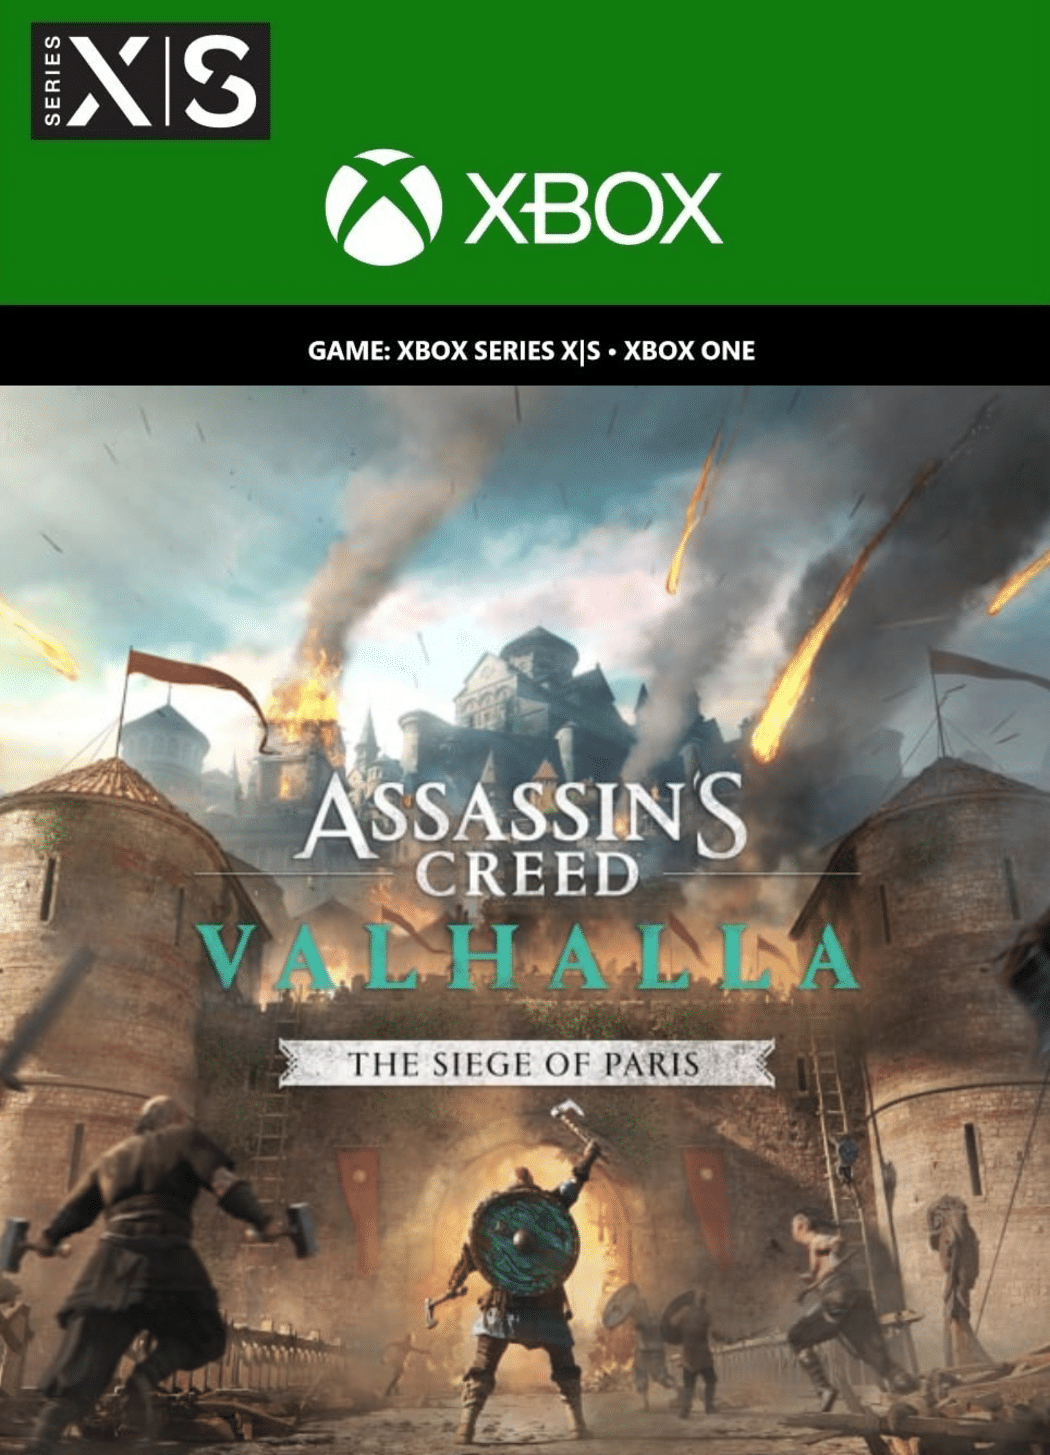 Asssassin's Creed Valhalla DLC - what was The Siege of Paris?